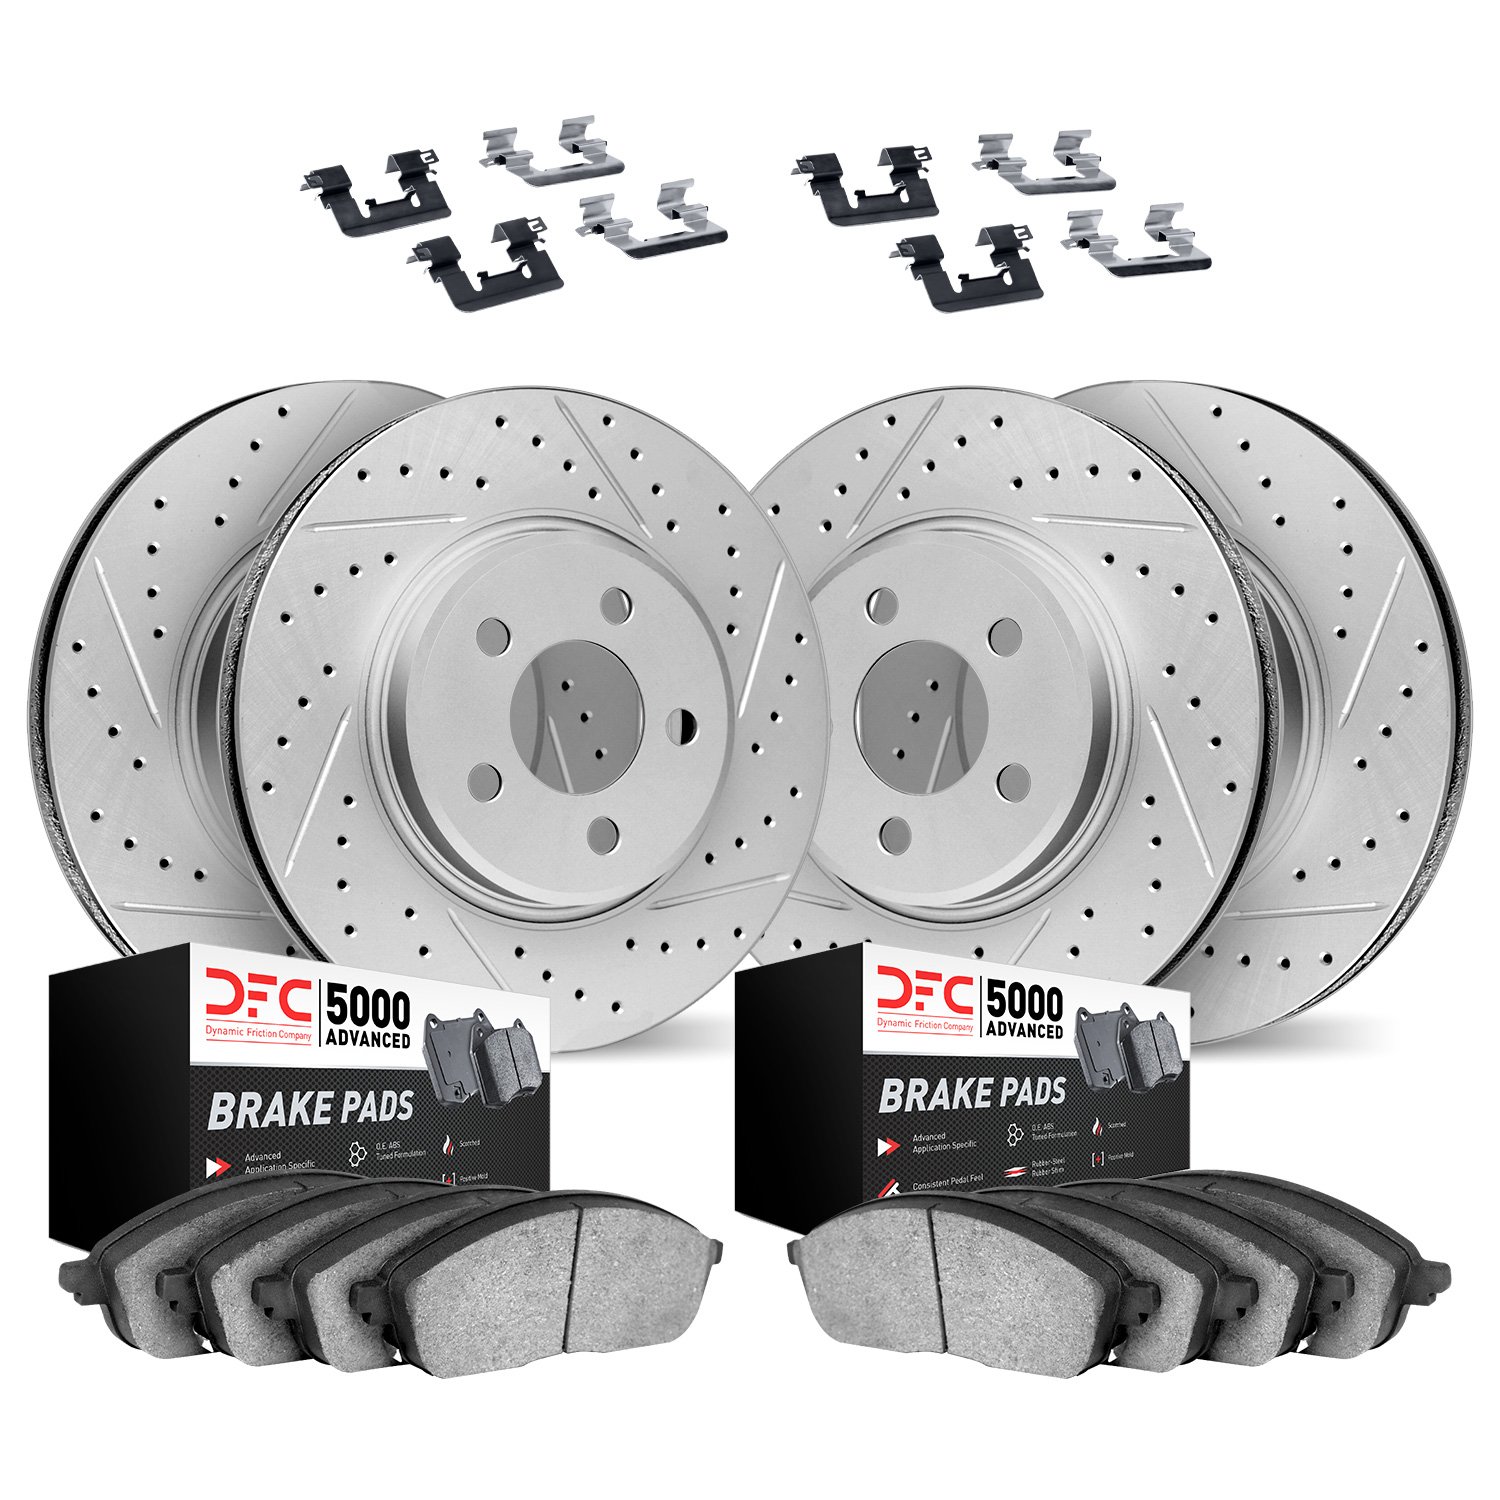 2514-11002 Geoperformance Drilled/Slotted Rotors w/5000 Advanced Brake Pads Kit & Hardware, 2010-2016 Land Rover, Position: Fron